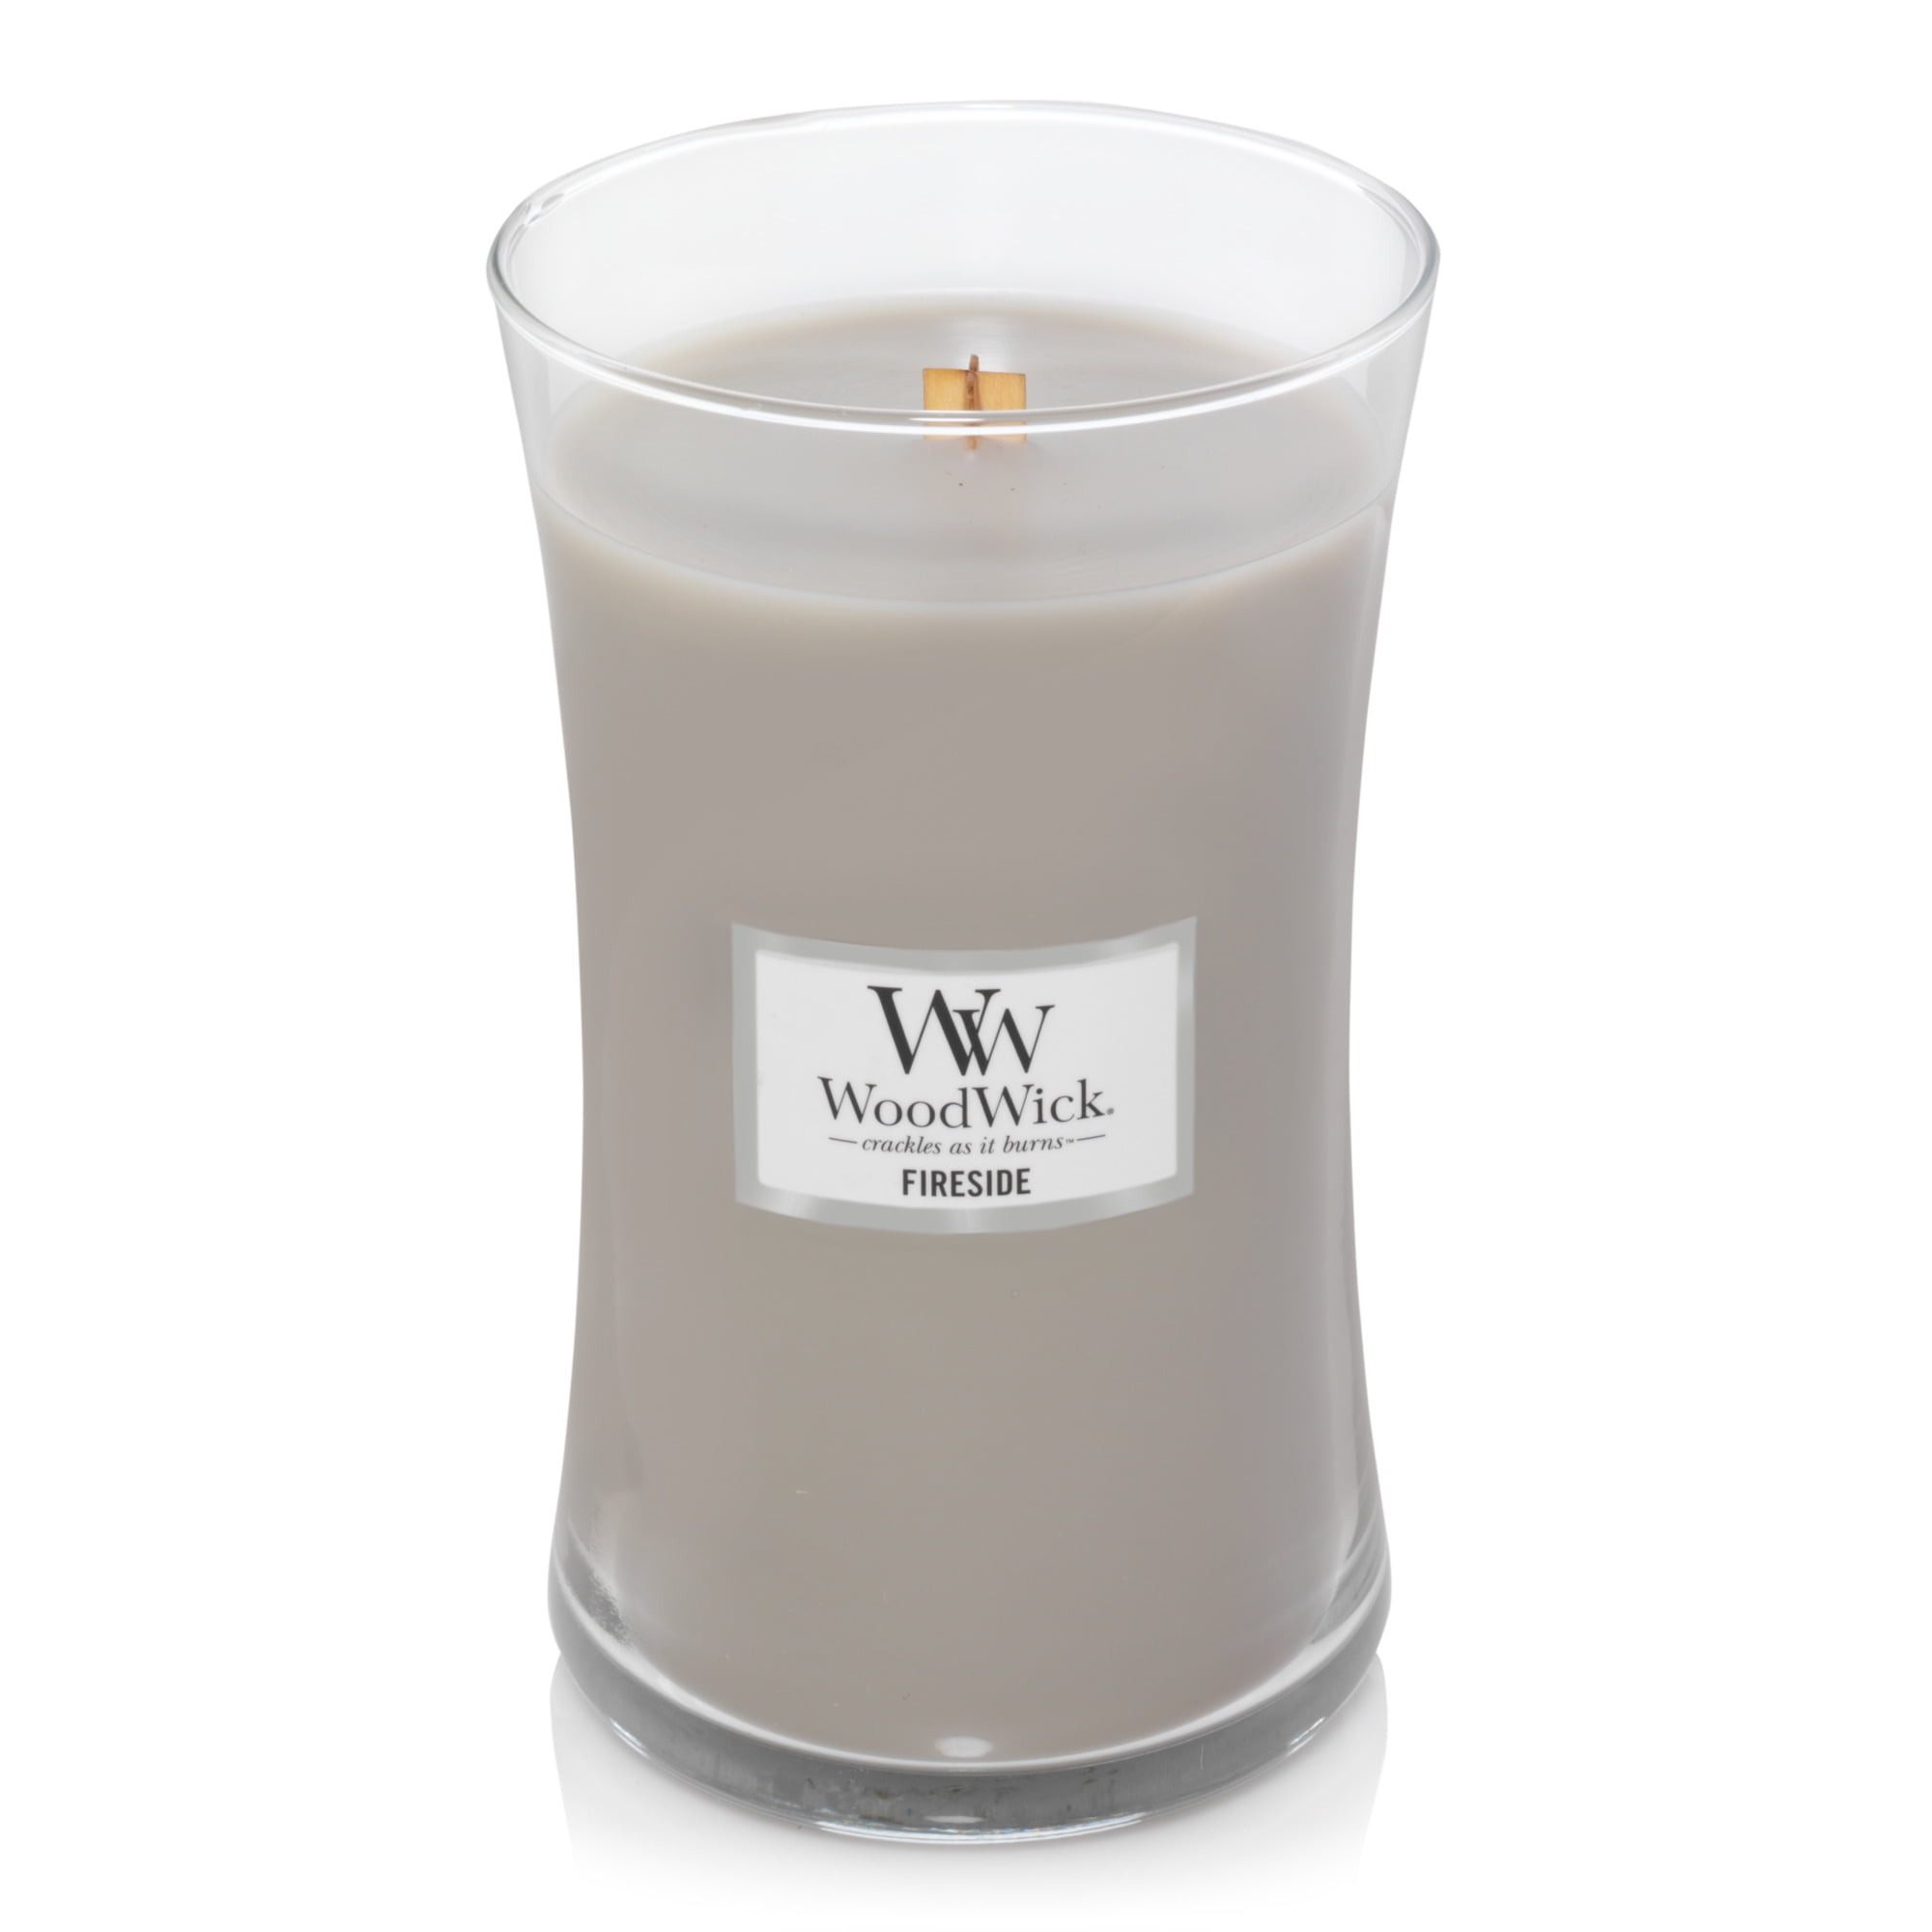 Sagewood & Seagrass WoodWick® Large Hourglass Candle - Large